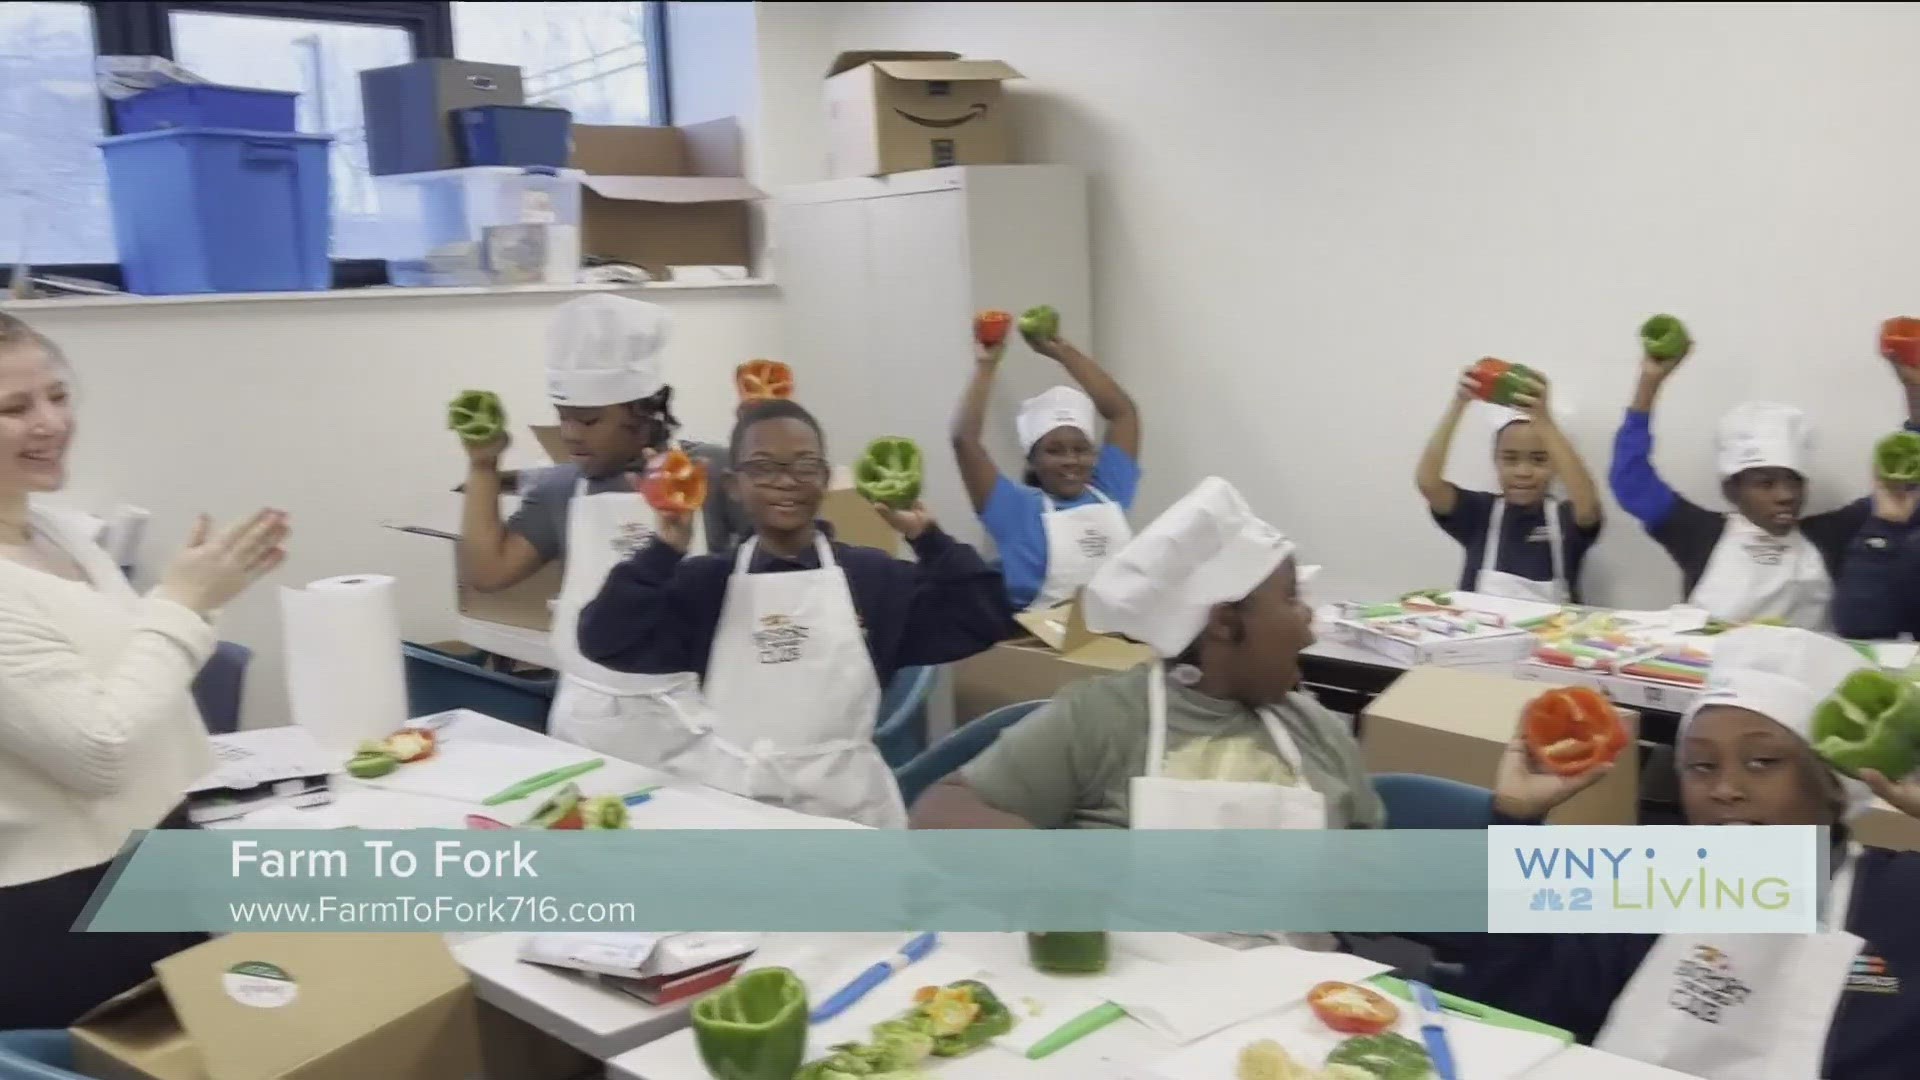 May 27th -WNY Living - Farm to Fork (THIS VIDEO IS SPONSORED BY FARM TO FORK)